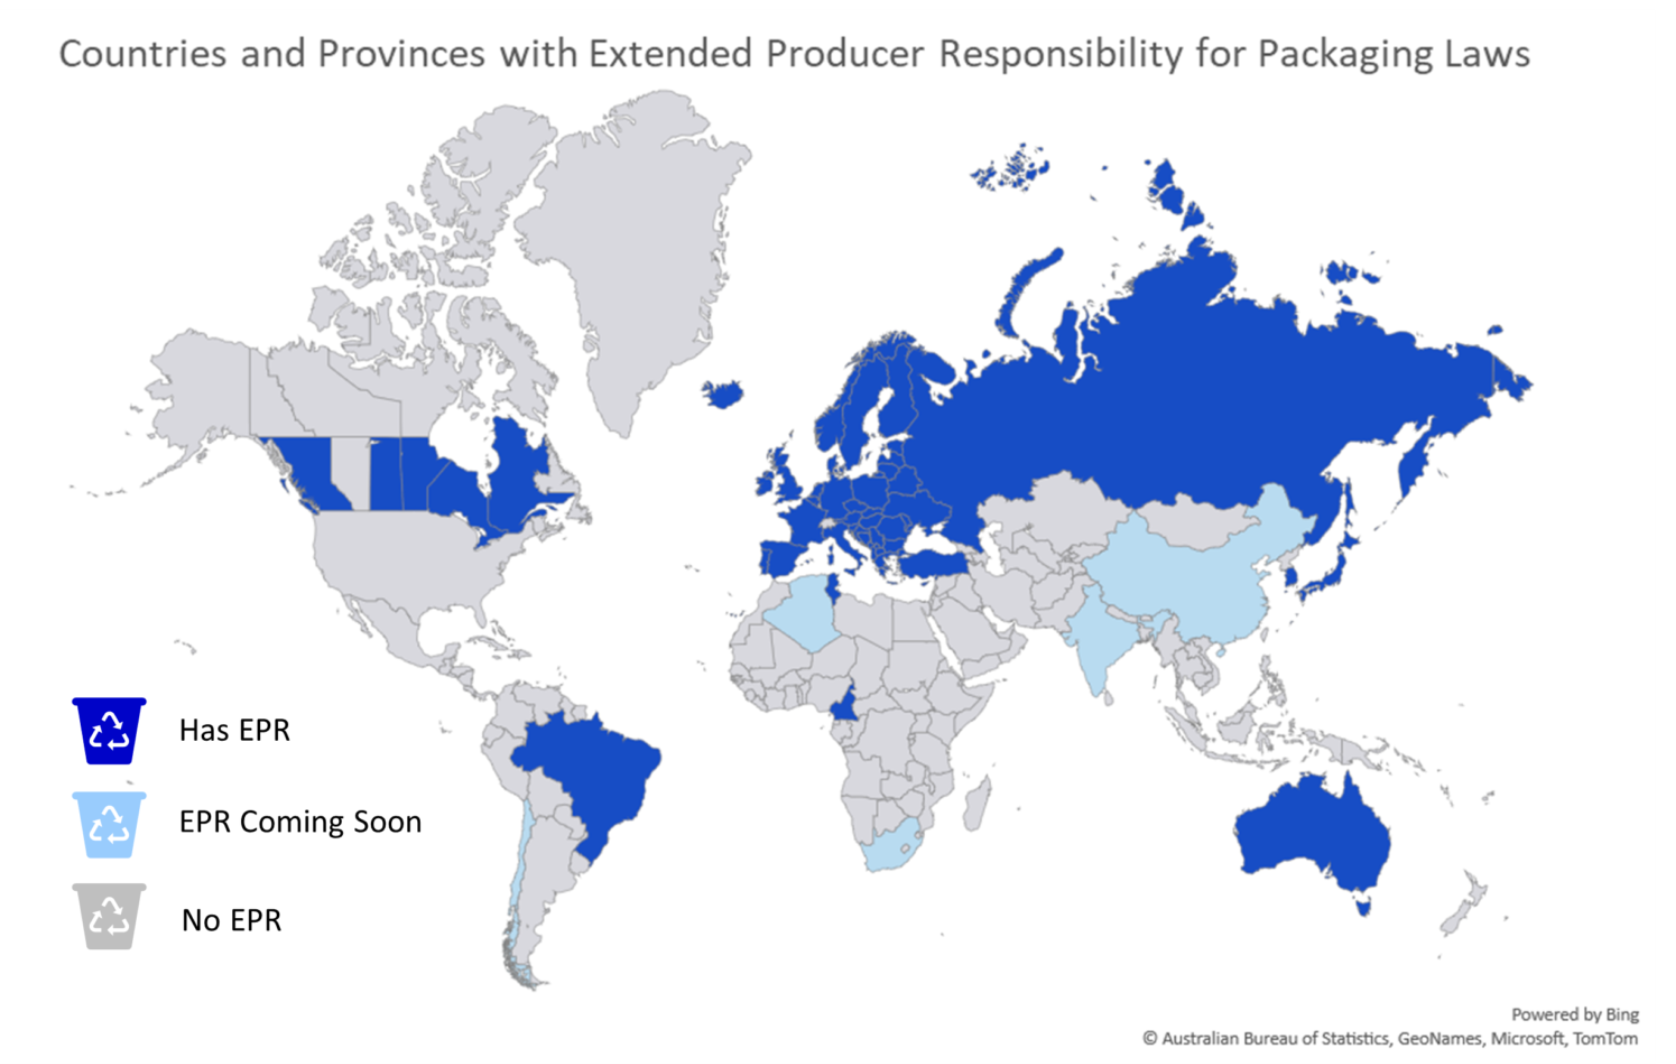 A map of the world showing which countries have or will soon have EPR policies